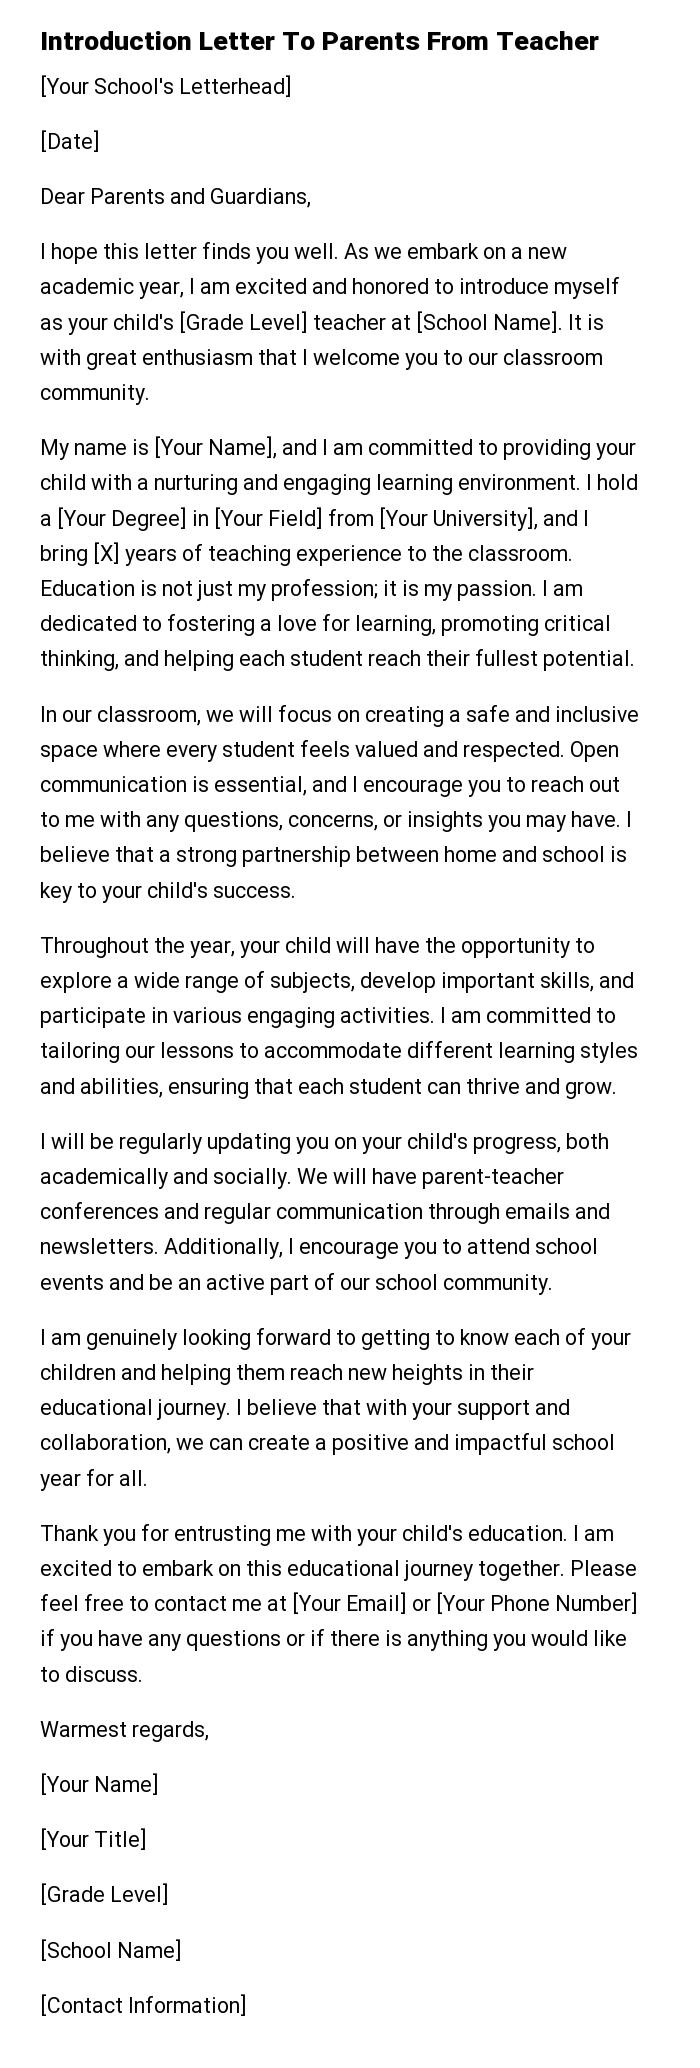 Introduction Letter To Parents From Teacher